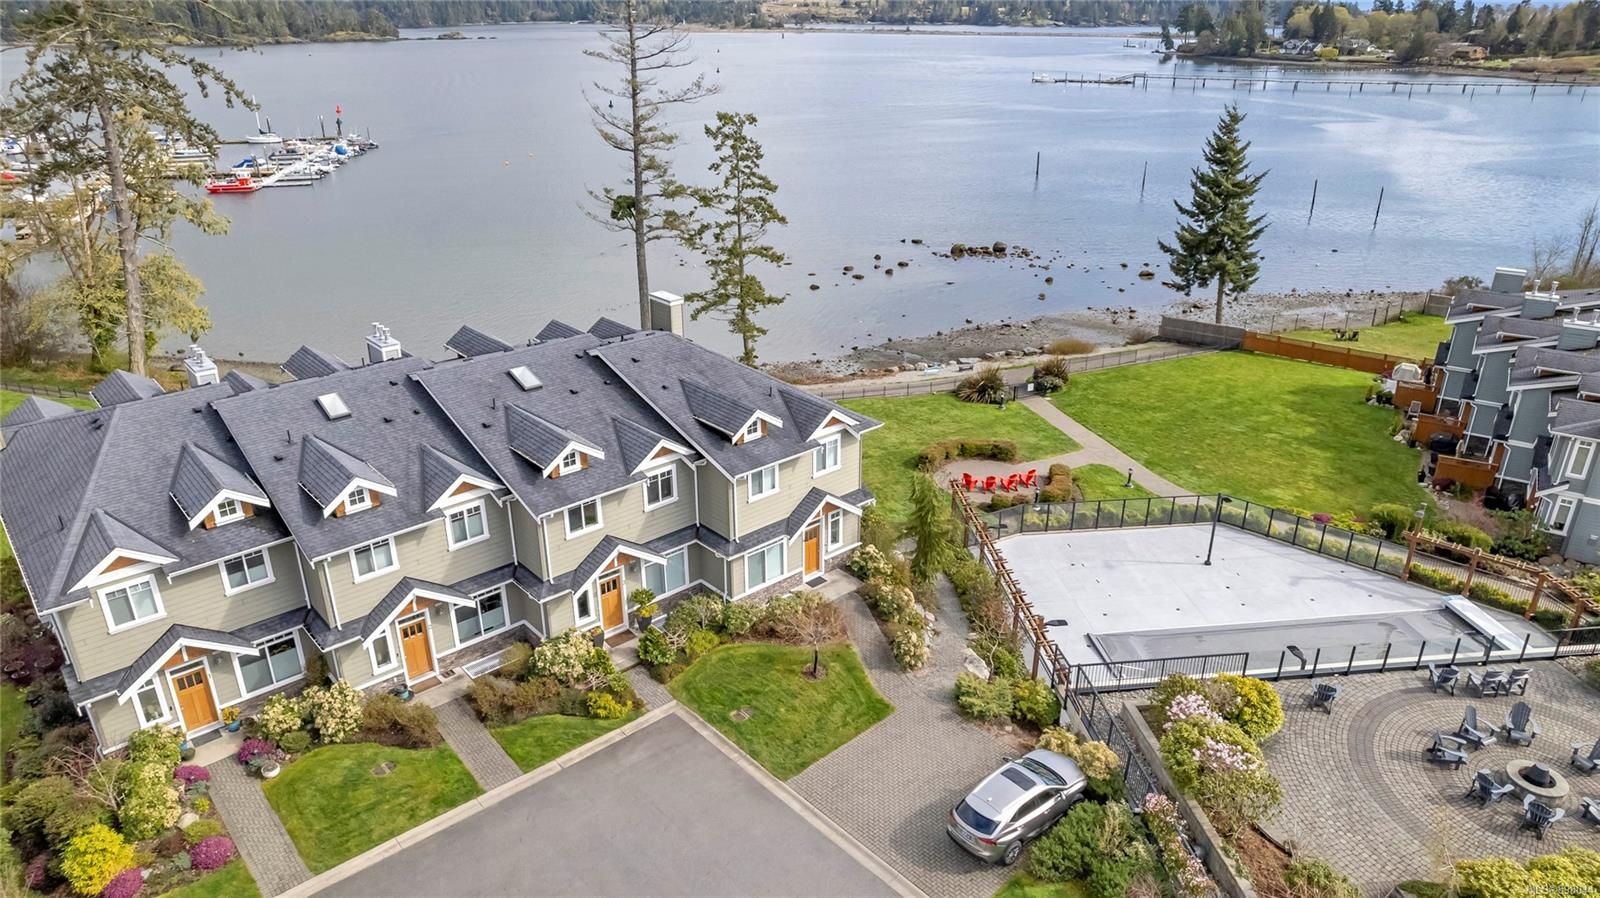 Open House. Open House on Saturday, July 23, 2022 11:00AM - 1:00PM
Stunning Oceanfront Sooke Townhouse in Heron View with 4 bedrooms and 4 bathrooms and all the amenities you can imagine. Open house this Saturday July 16th 11am to 1pm. $1,199,000.00 and P